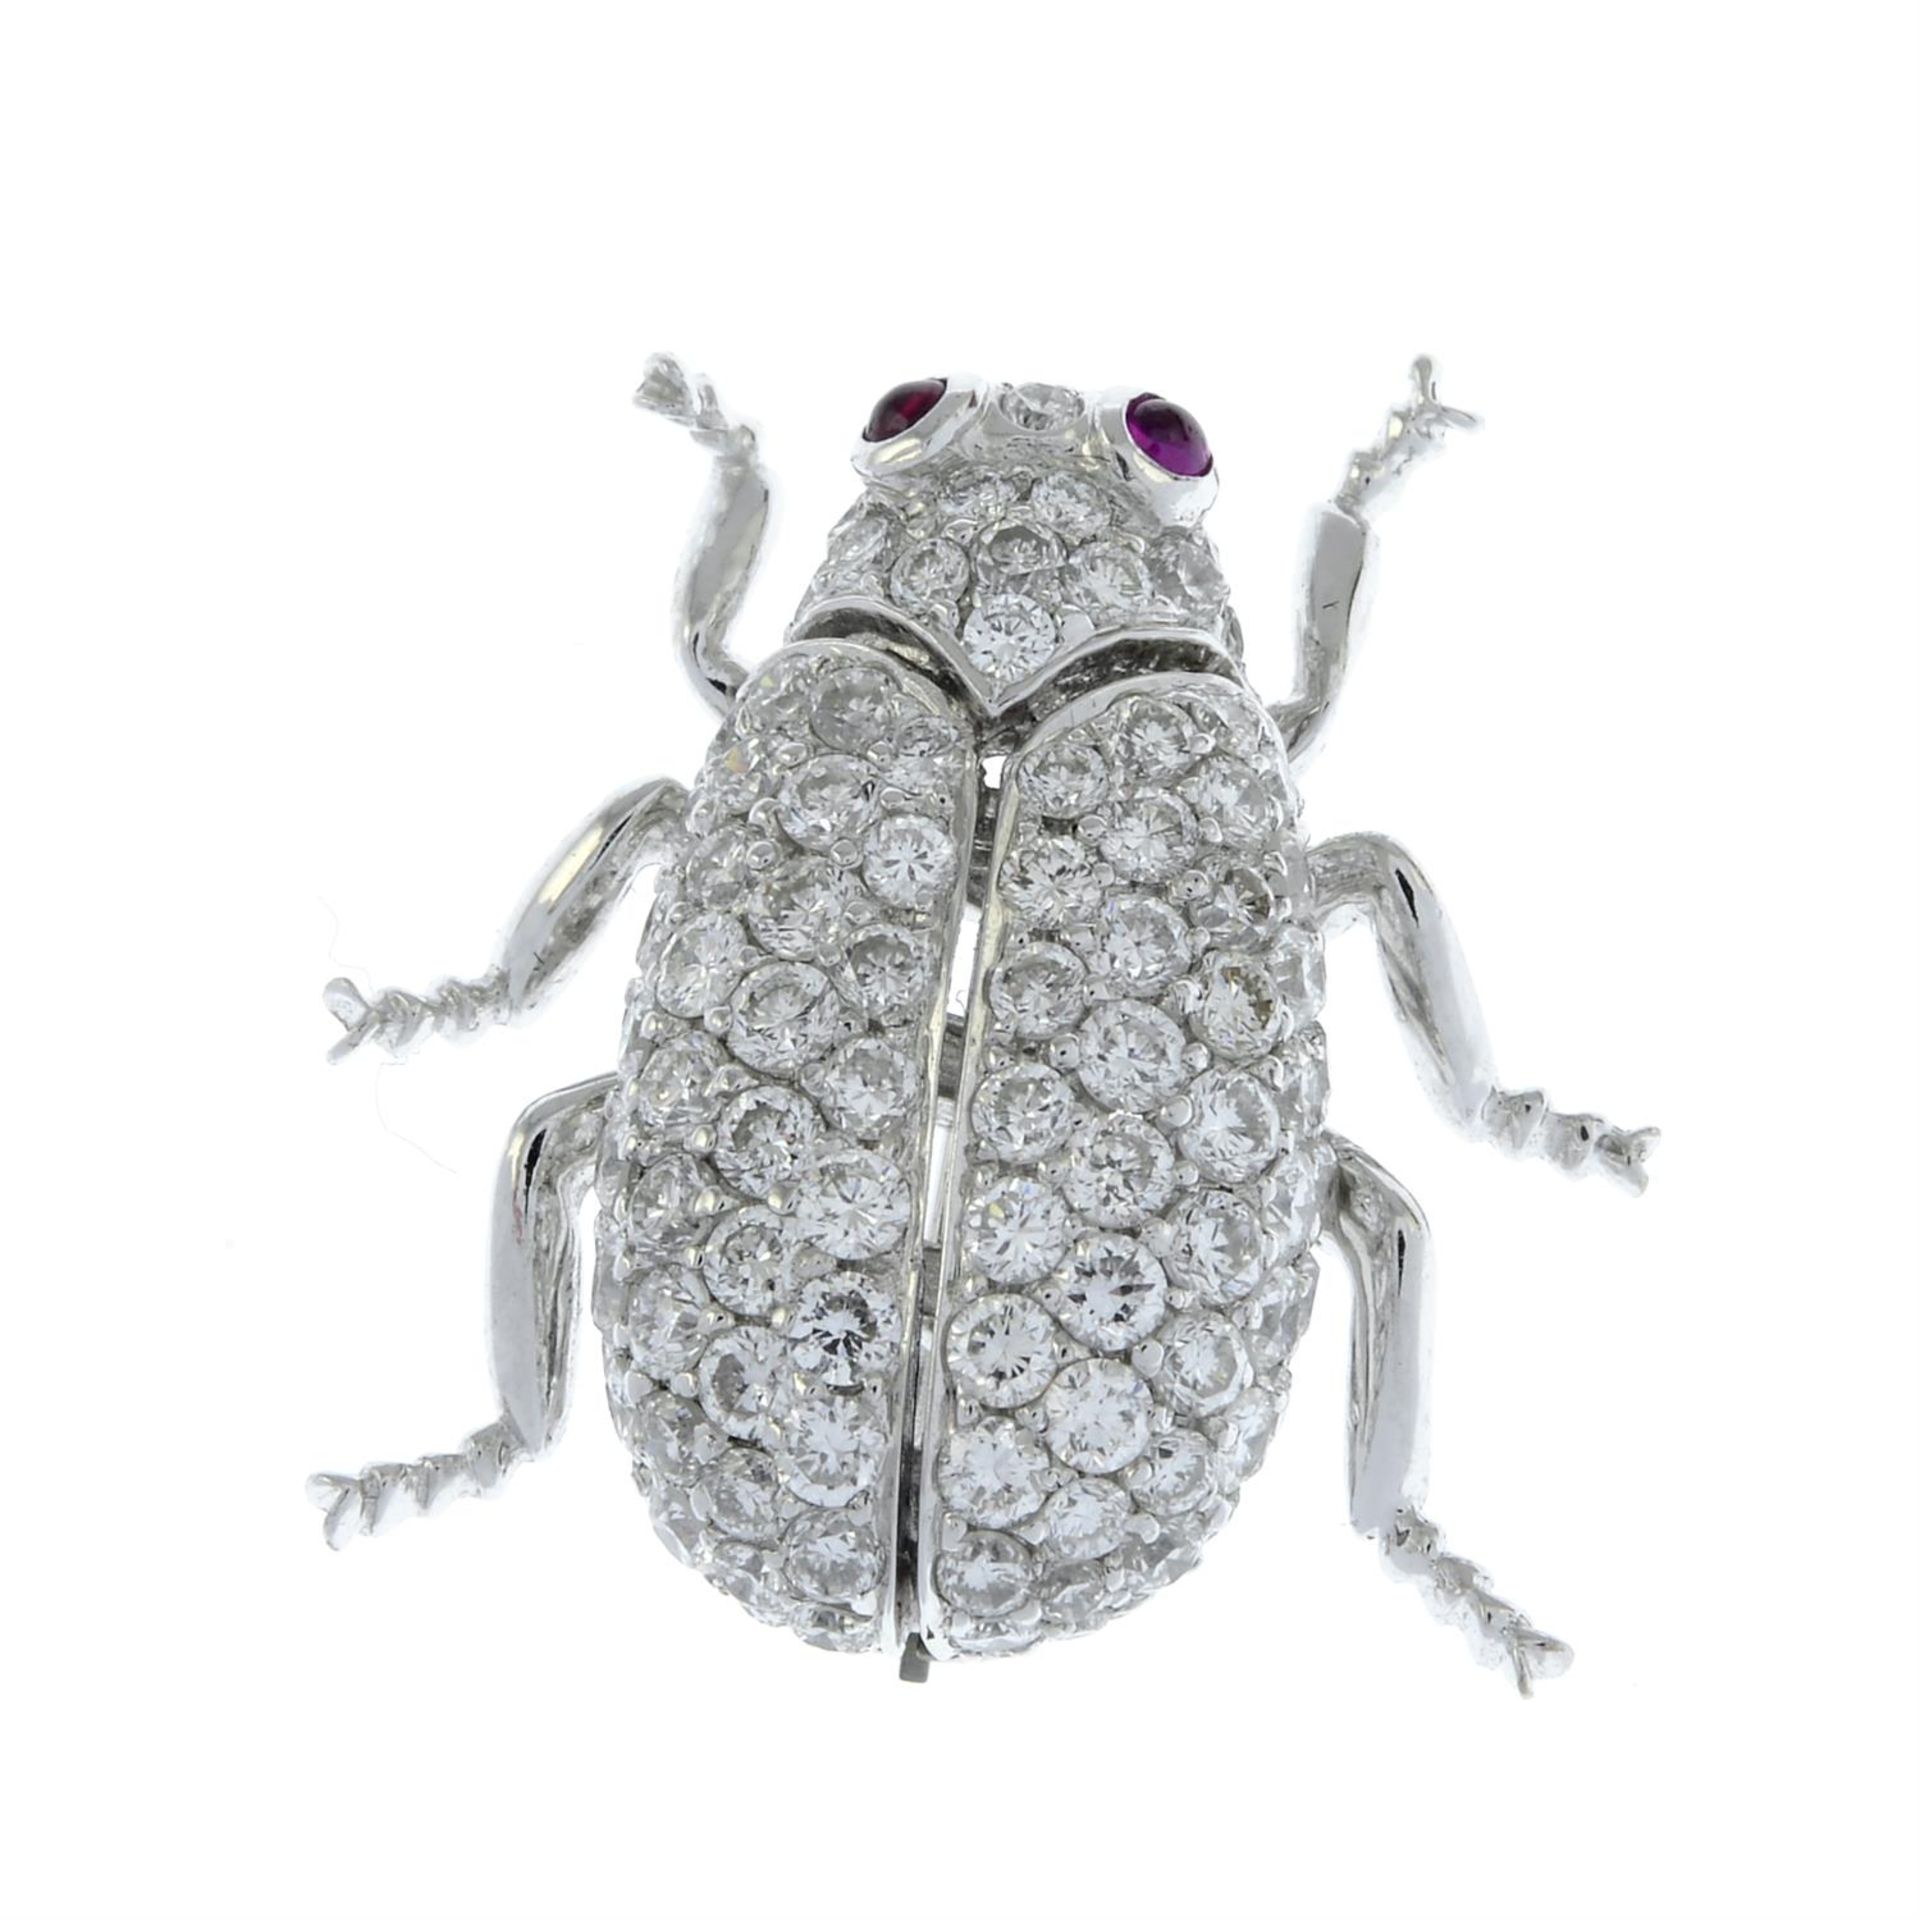 A pavé-set diamond beetle insect brooch, with ruby eyes. - Image 2 of 4